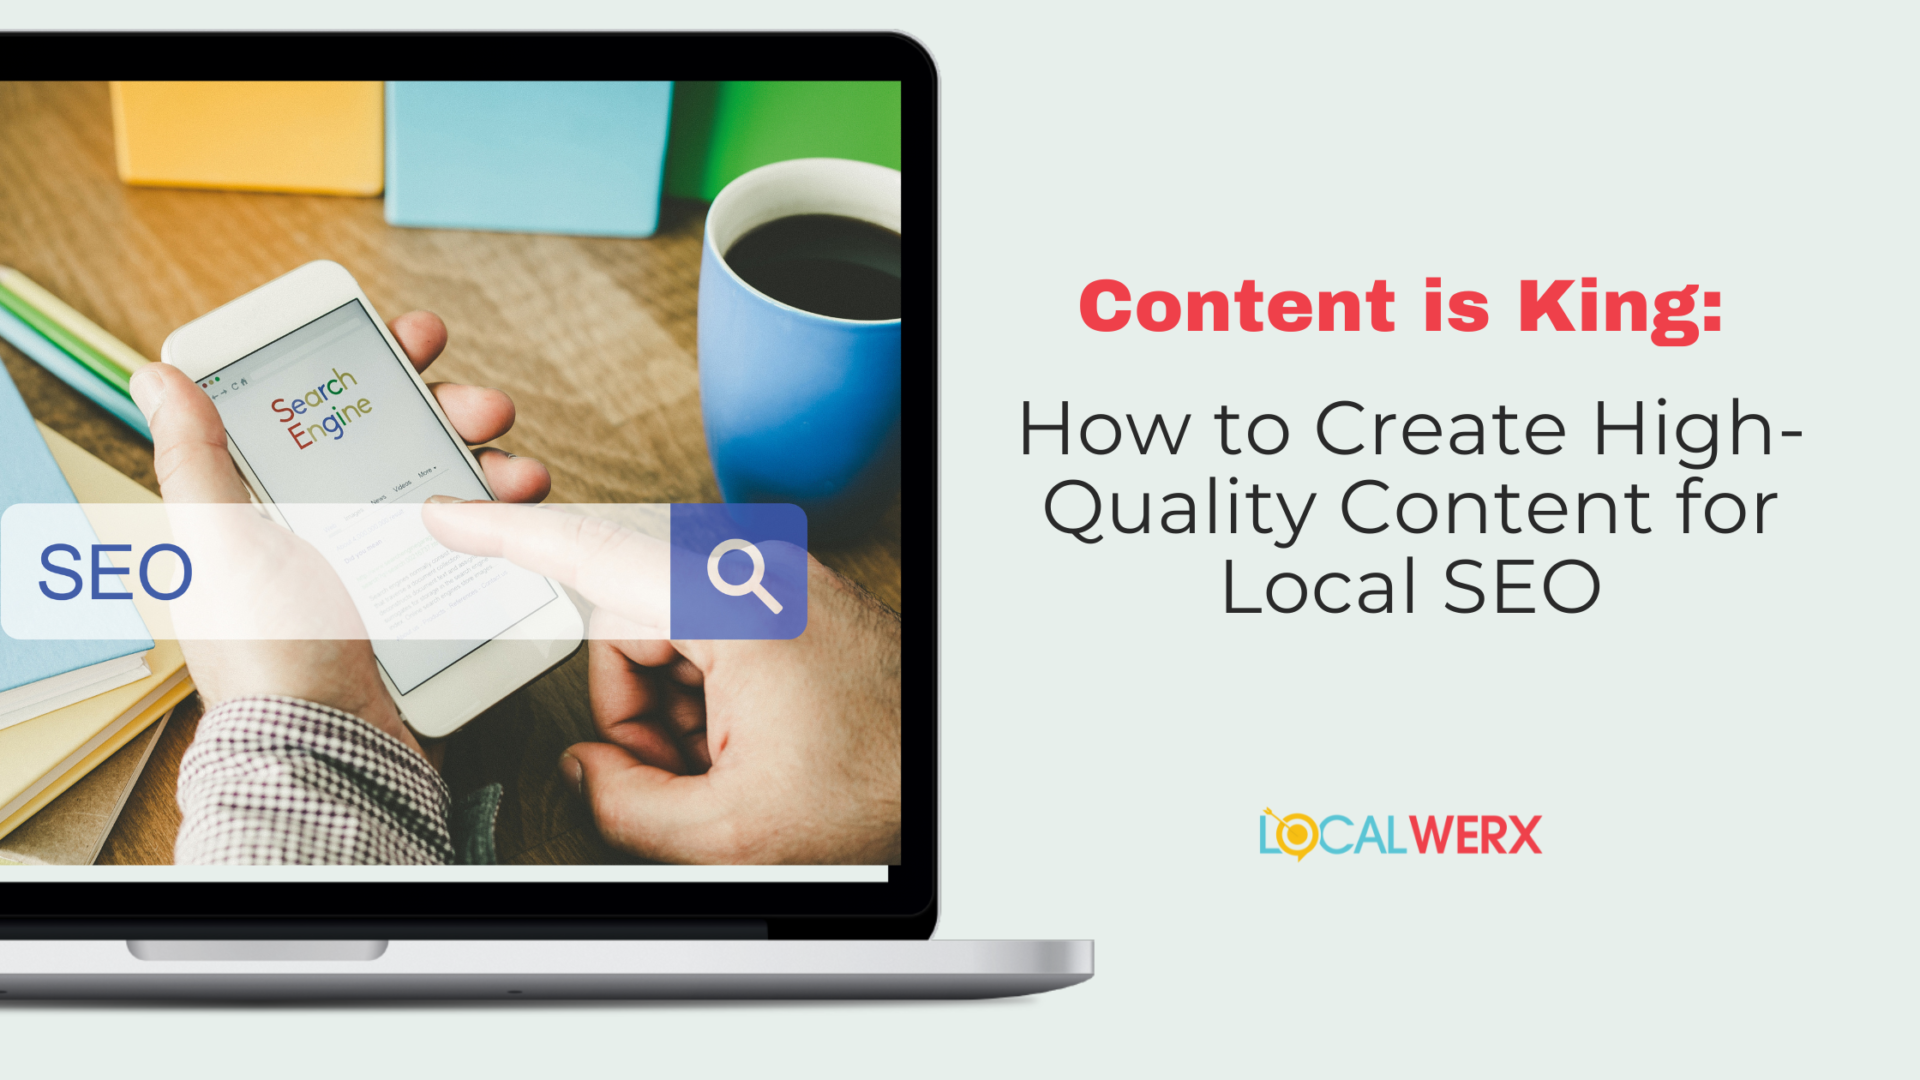 Content is King: How to Create High-Quality Content for Local SEO